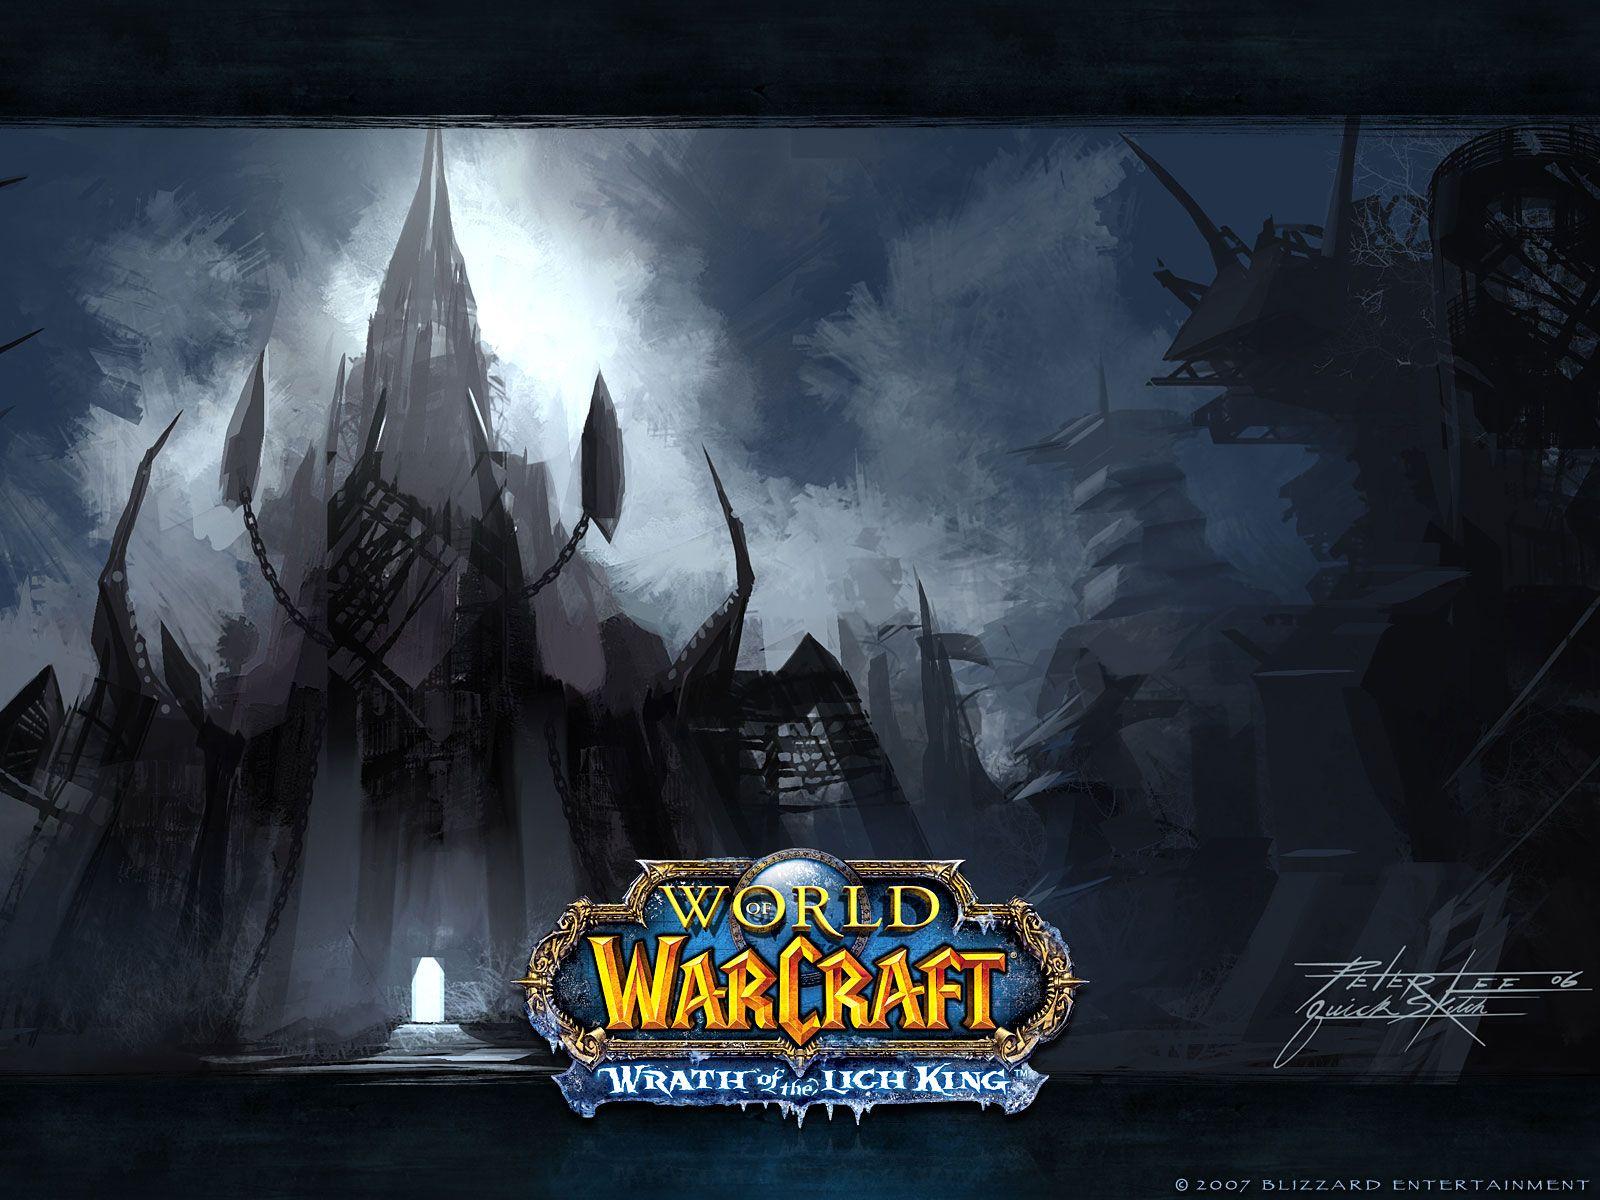 World of Warcraft: Wrath of the Lich King review and download